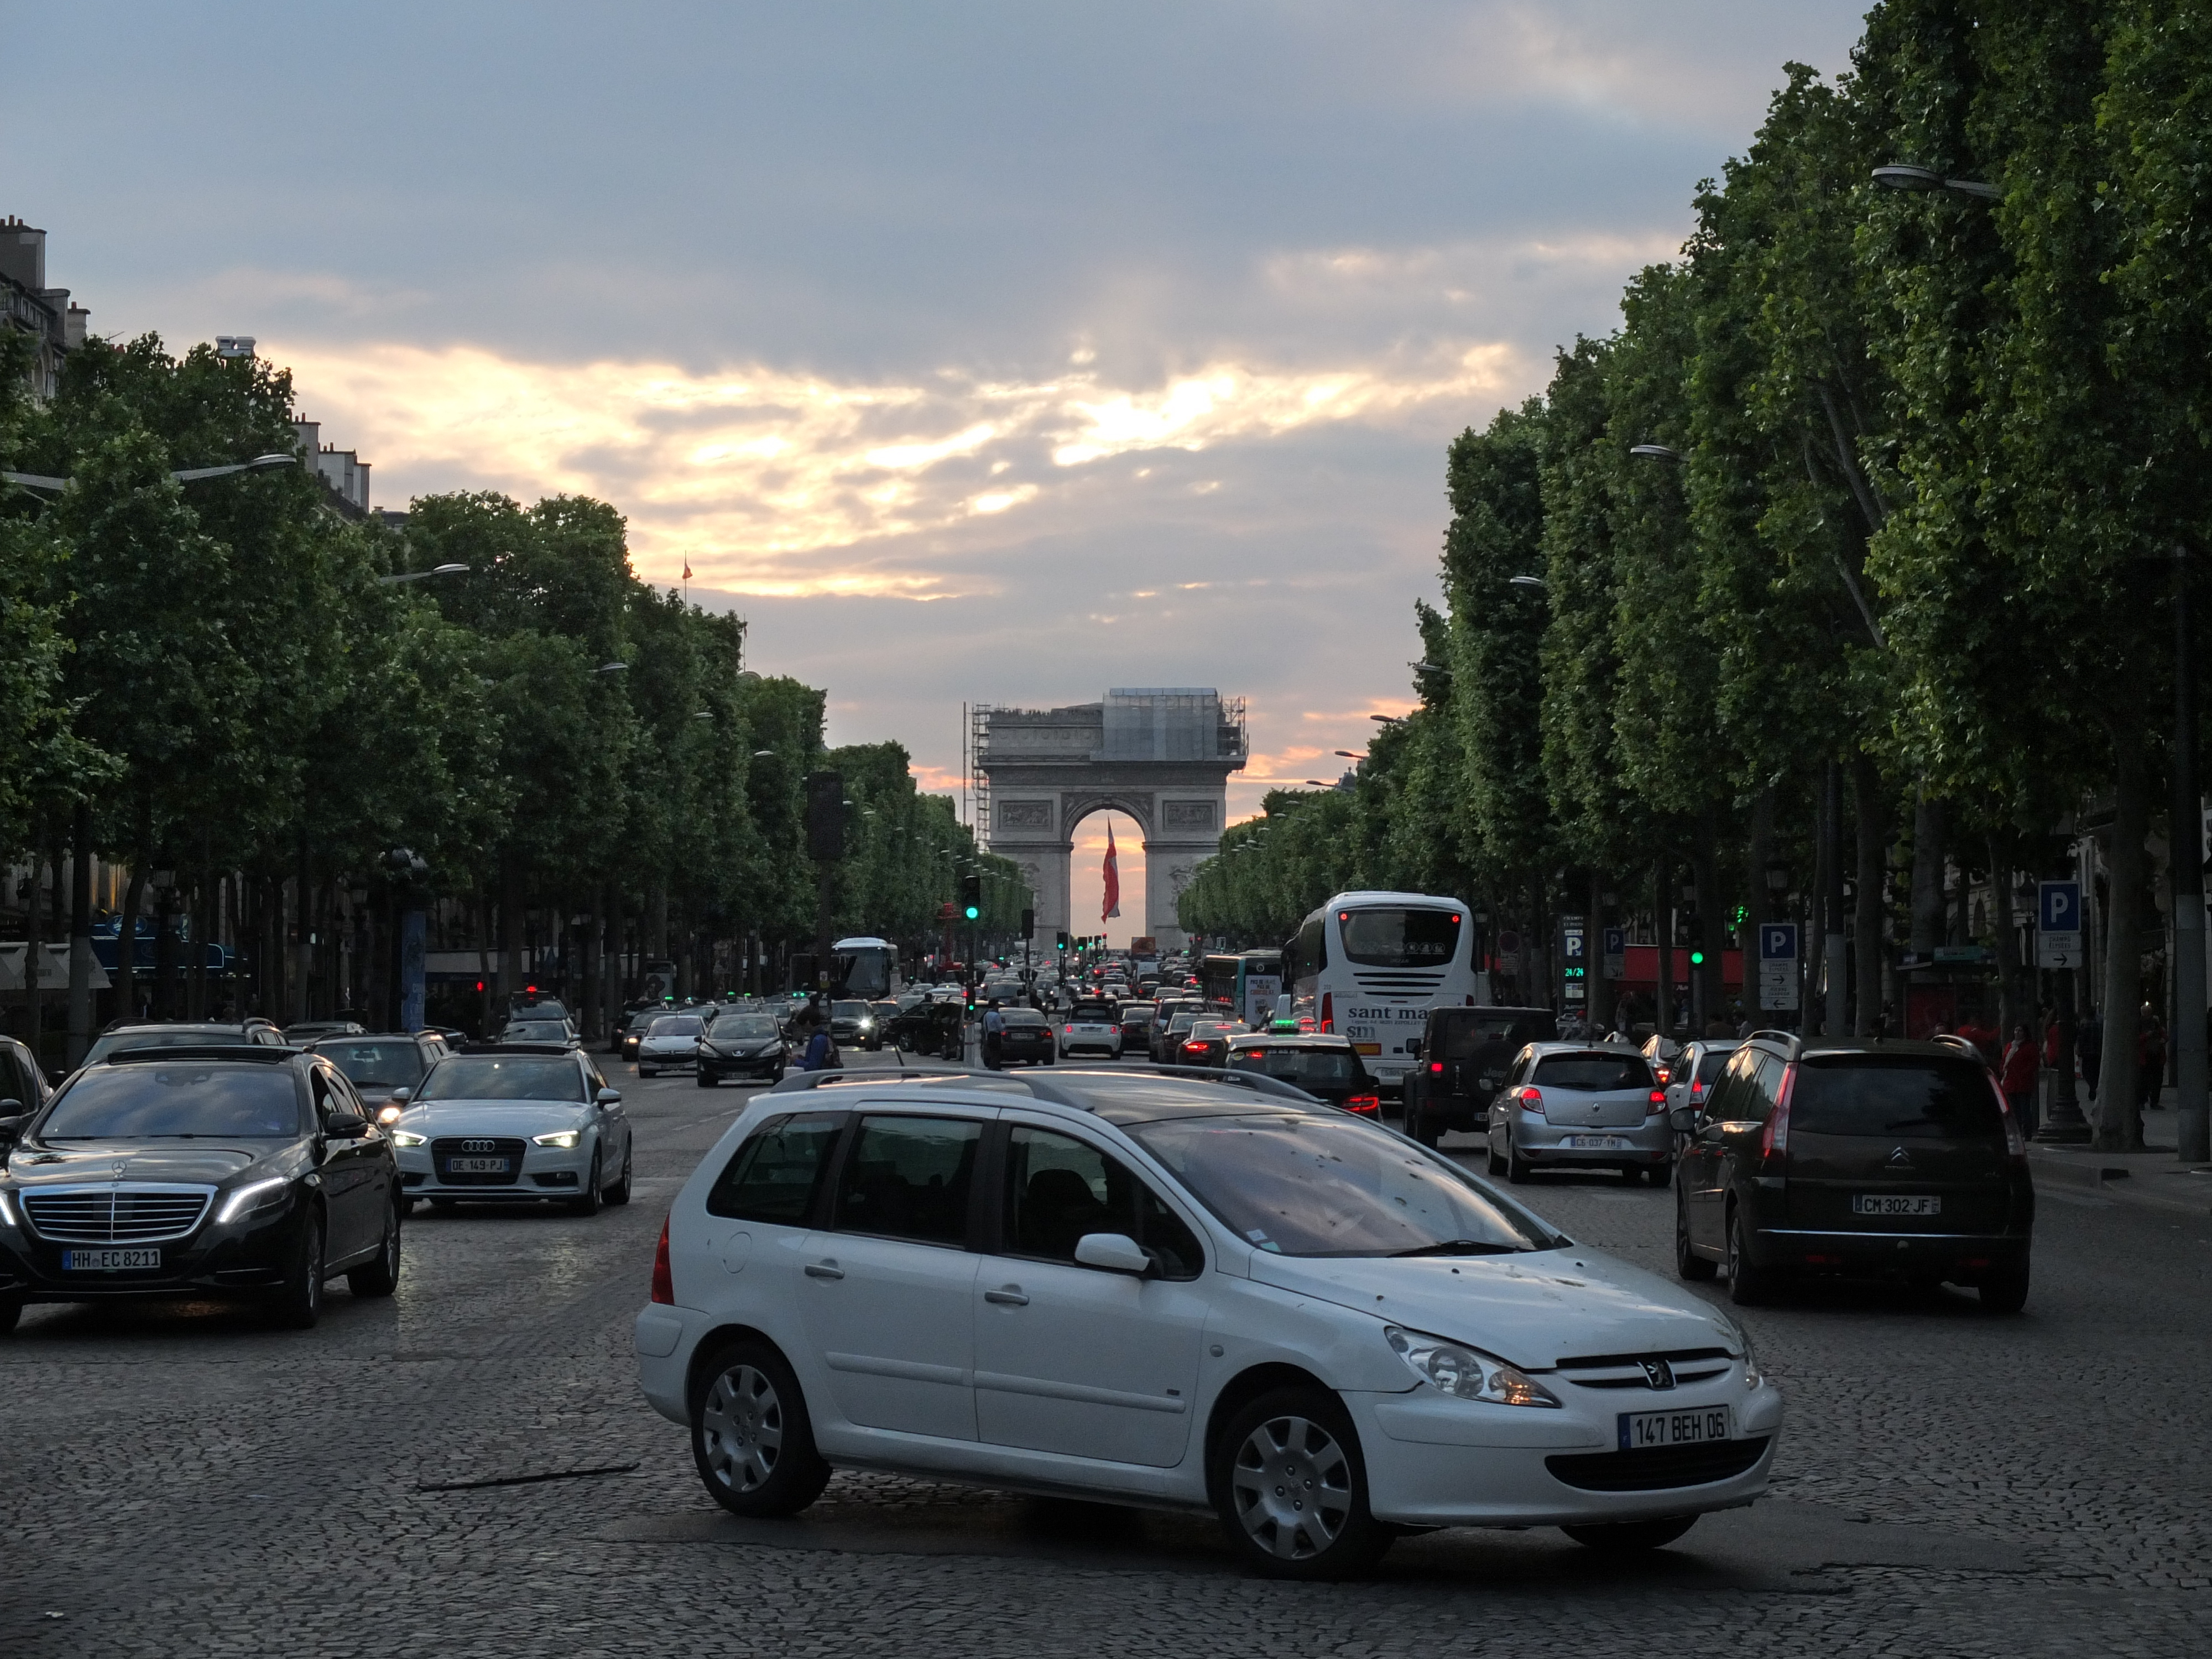 Champs Elysees, and/or Mercedes commercial